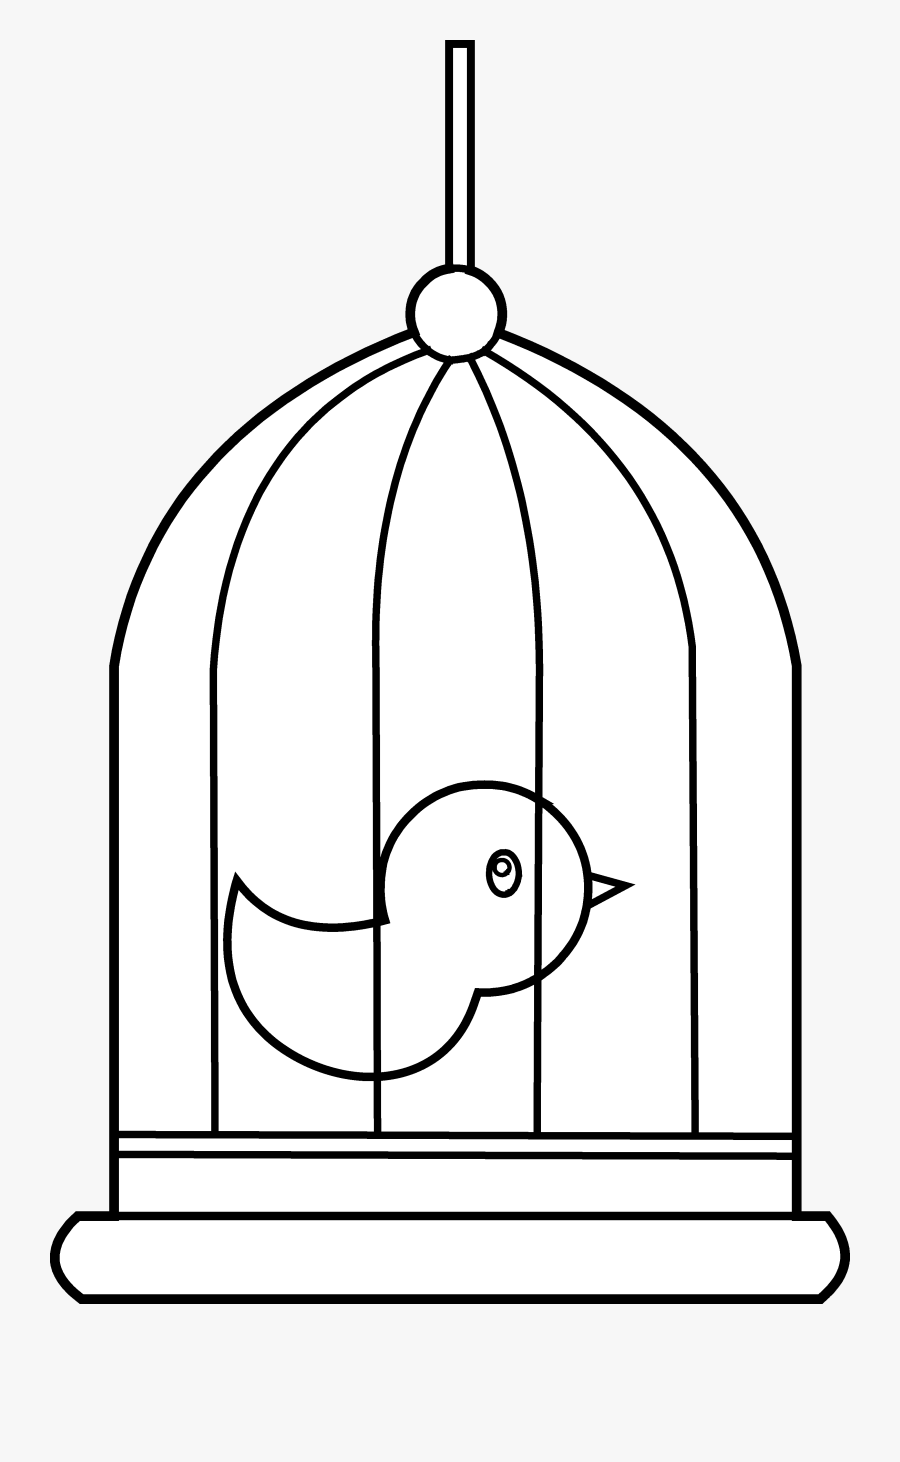 Bird In Cage Coloring - Bird In The Cage Clipart Black And White Free, Transparent Clipart